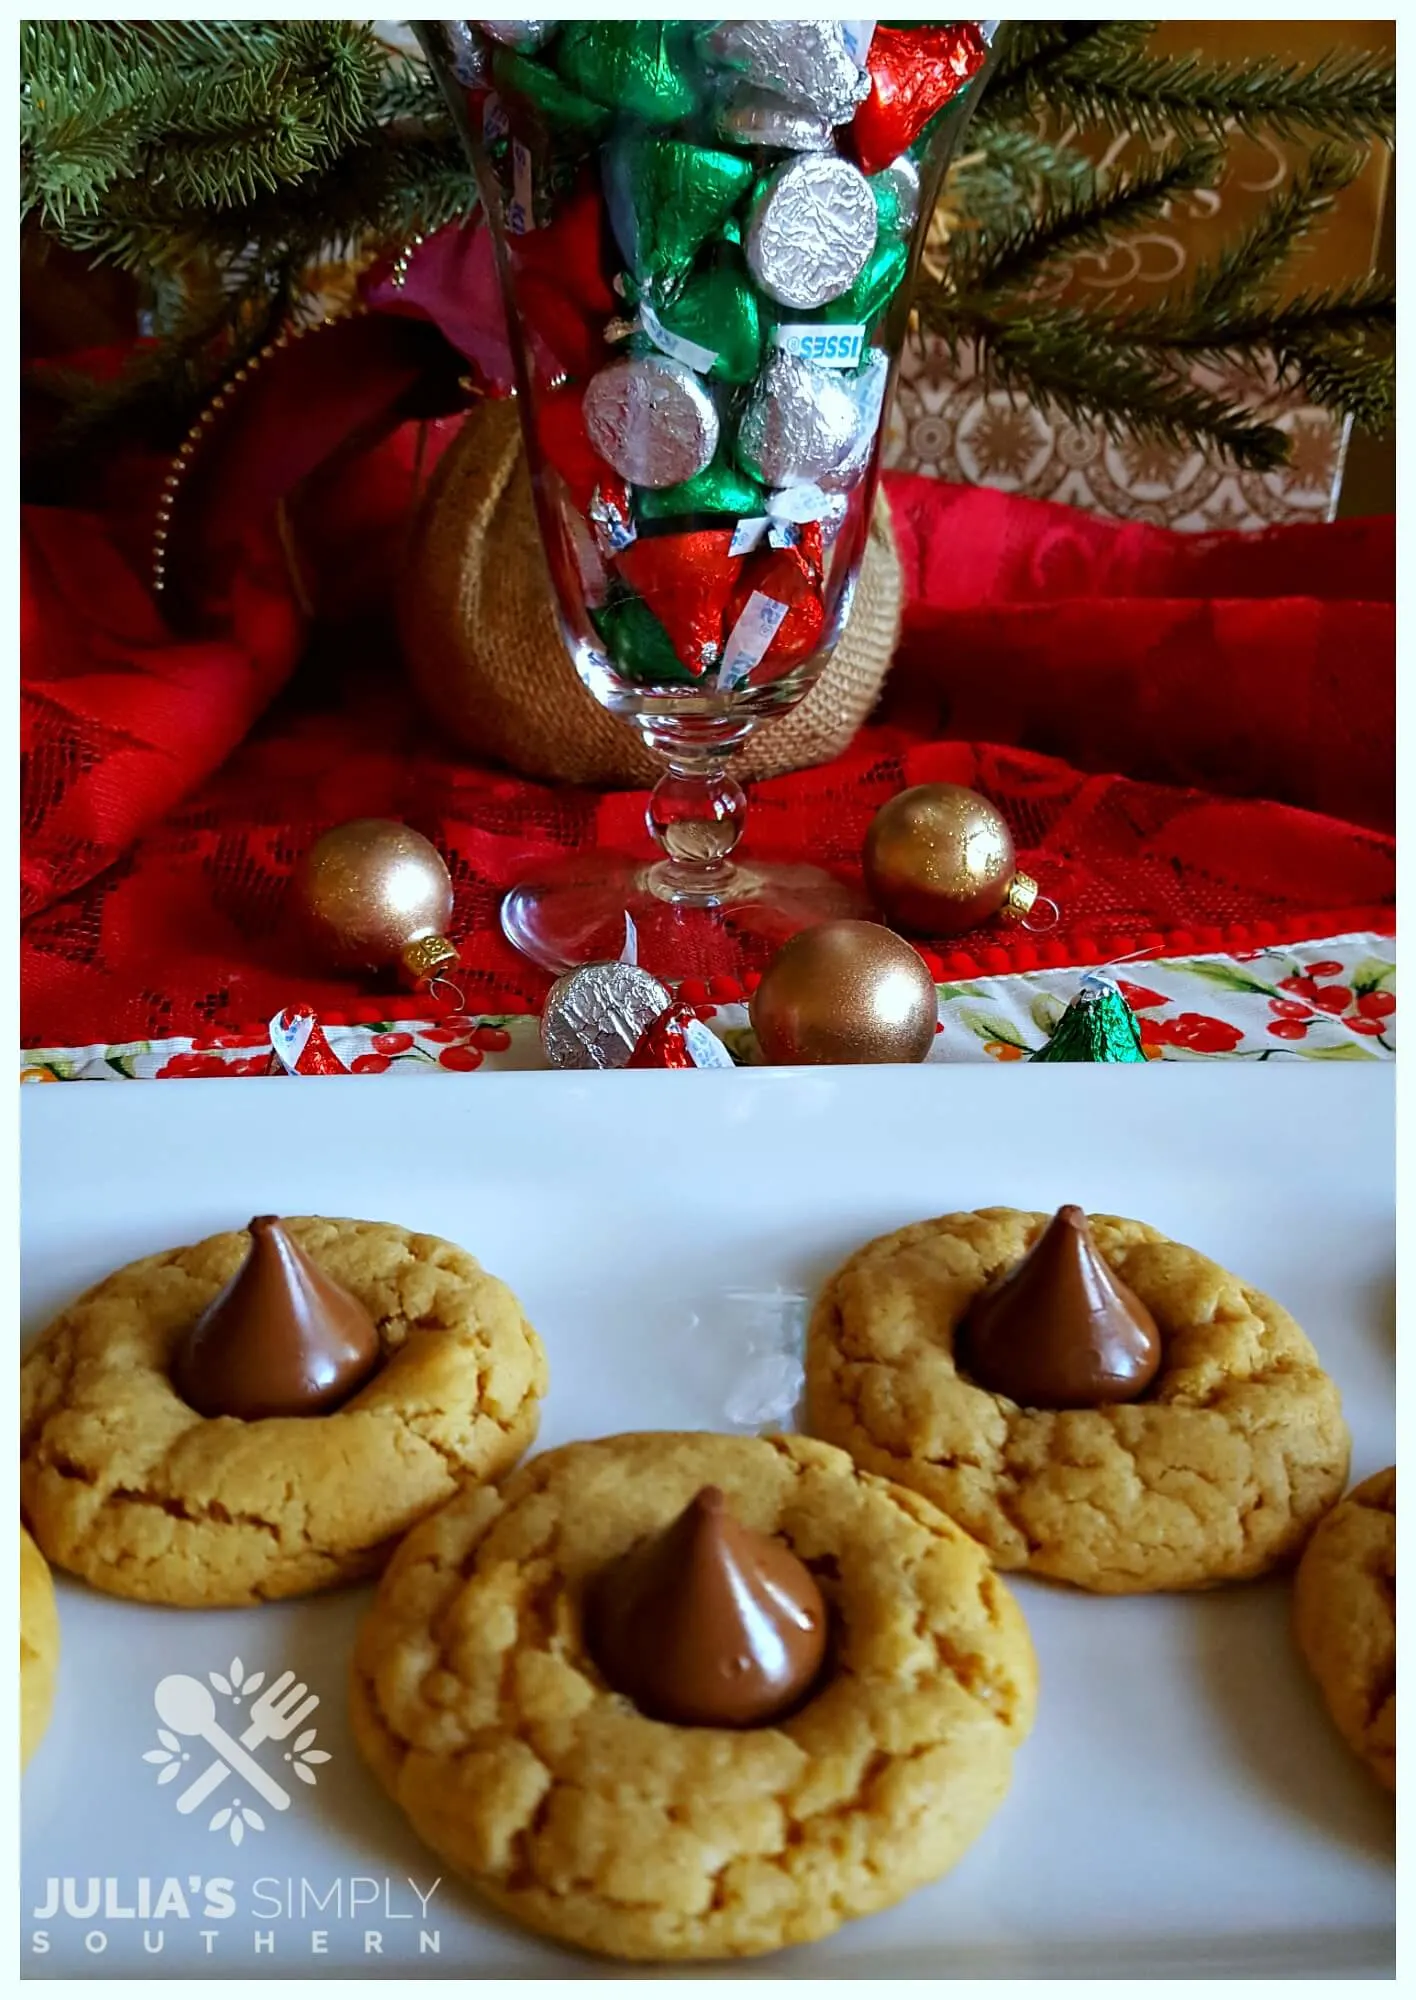 https://juliassimplysouthern.com/wp-content/uploads/Delicious-Peanut-Butter-Hershey-Kiss-Cookies-Christmas-Baking-for-the-holidays-Julias-Simply-Southern.jpg.webp